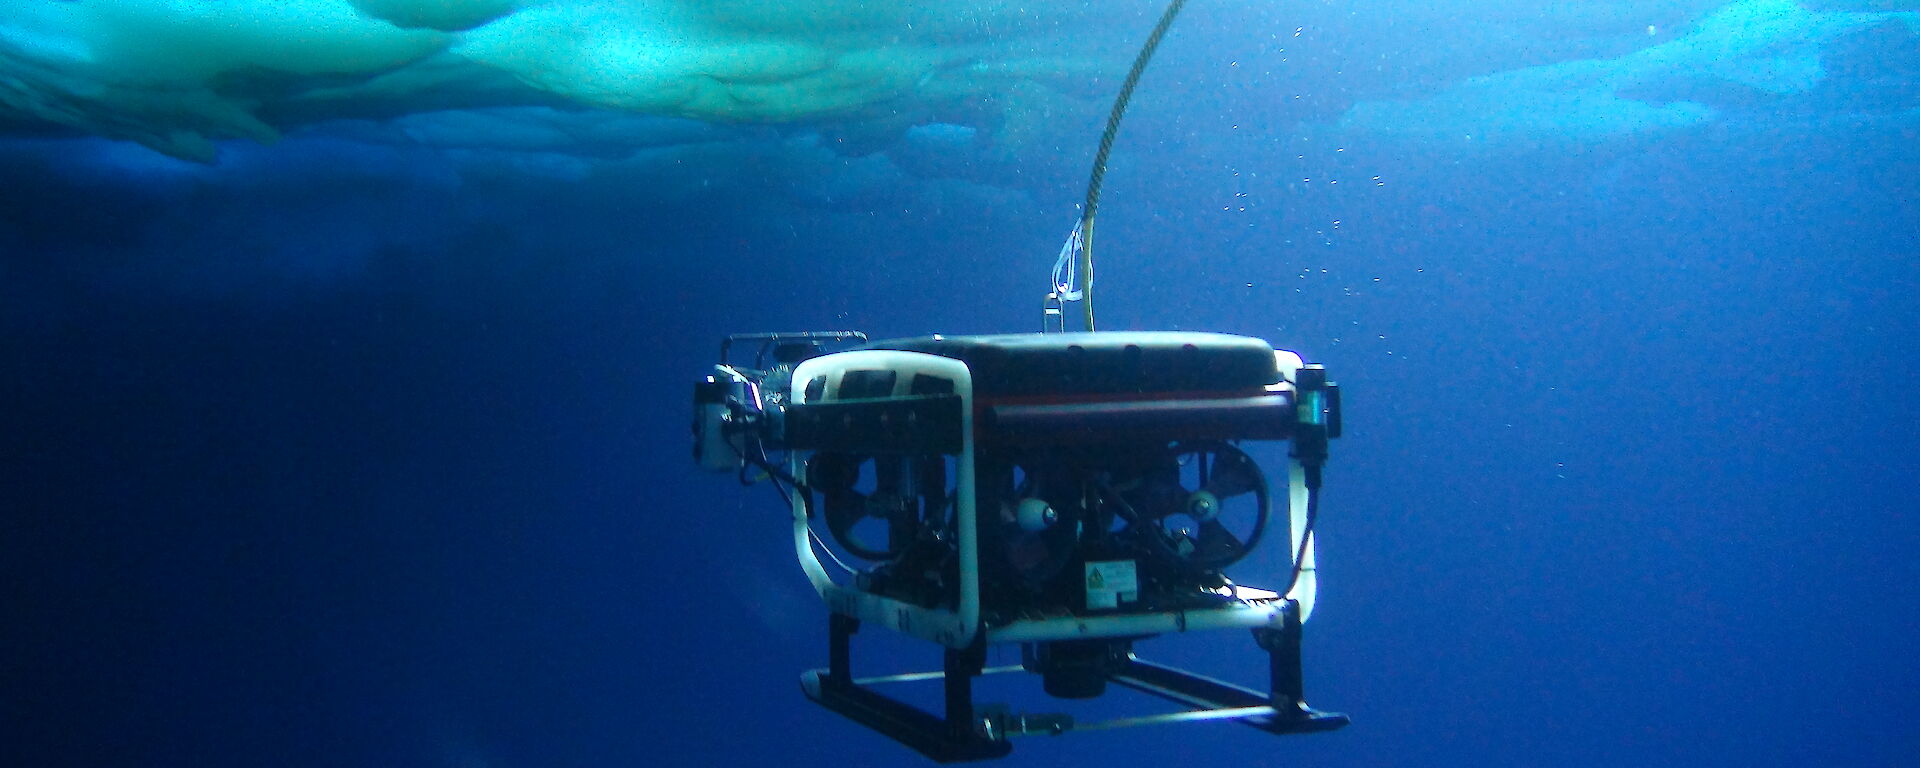 The ROV being deployed under the sea ice in Antarctica.